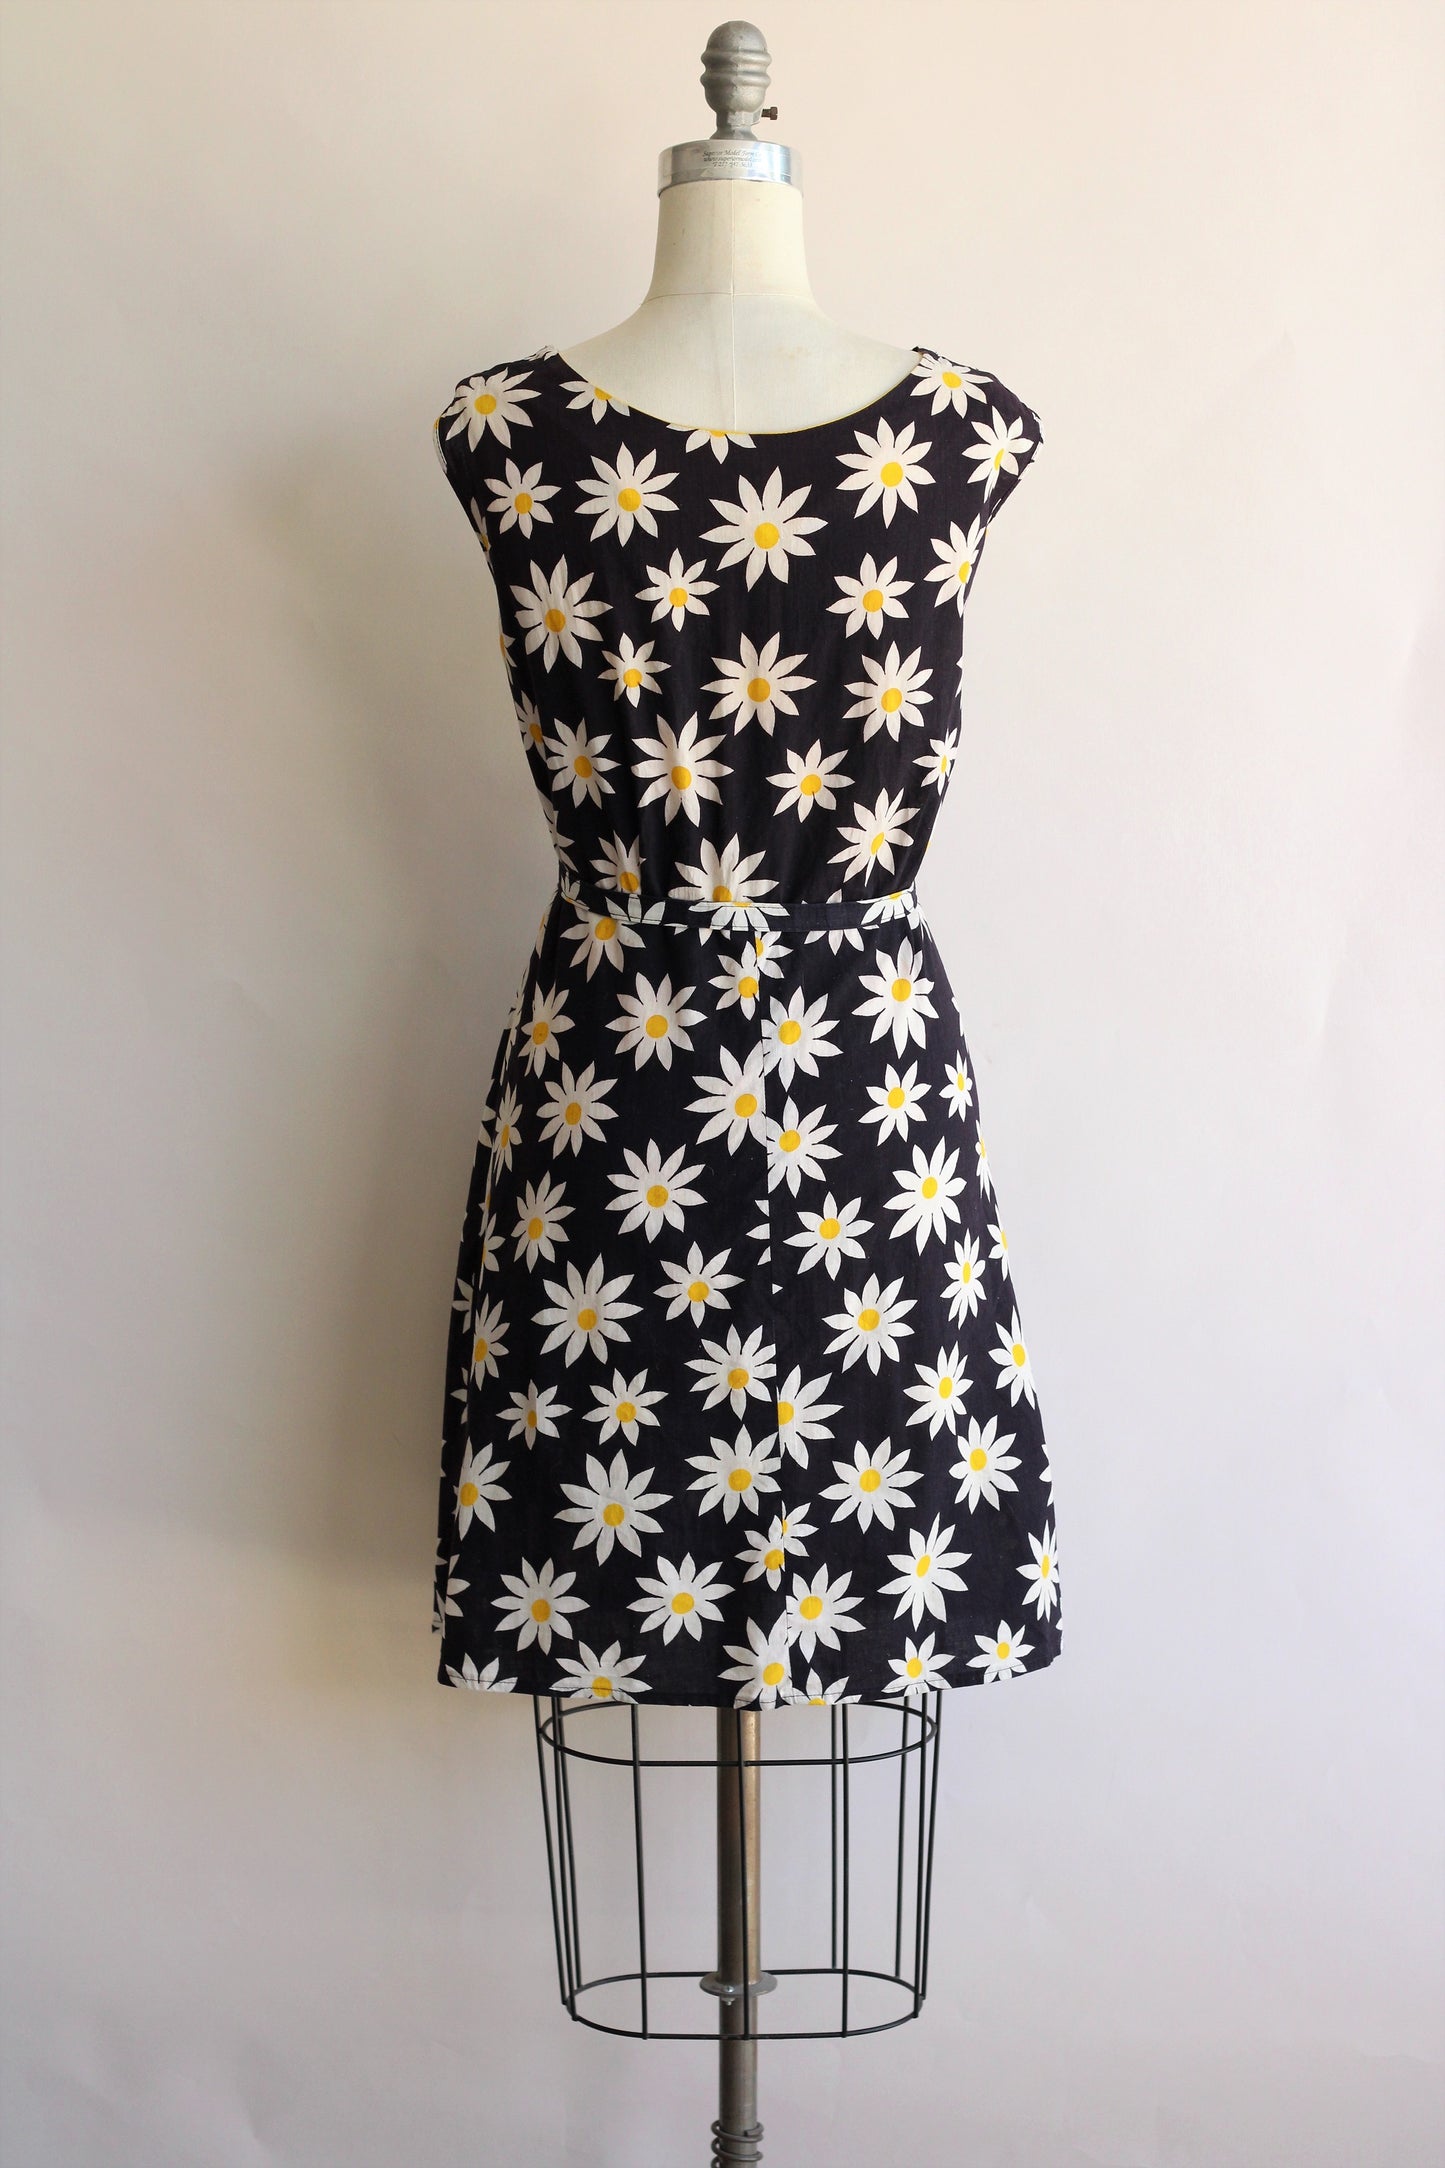 Vintage 1960s Plus Size Daisy Print Sundress with Belt and Pockets